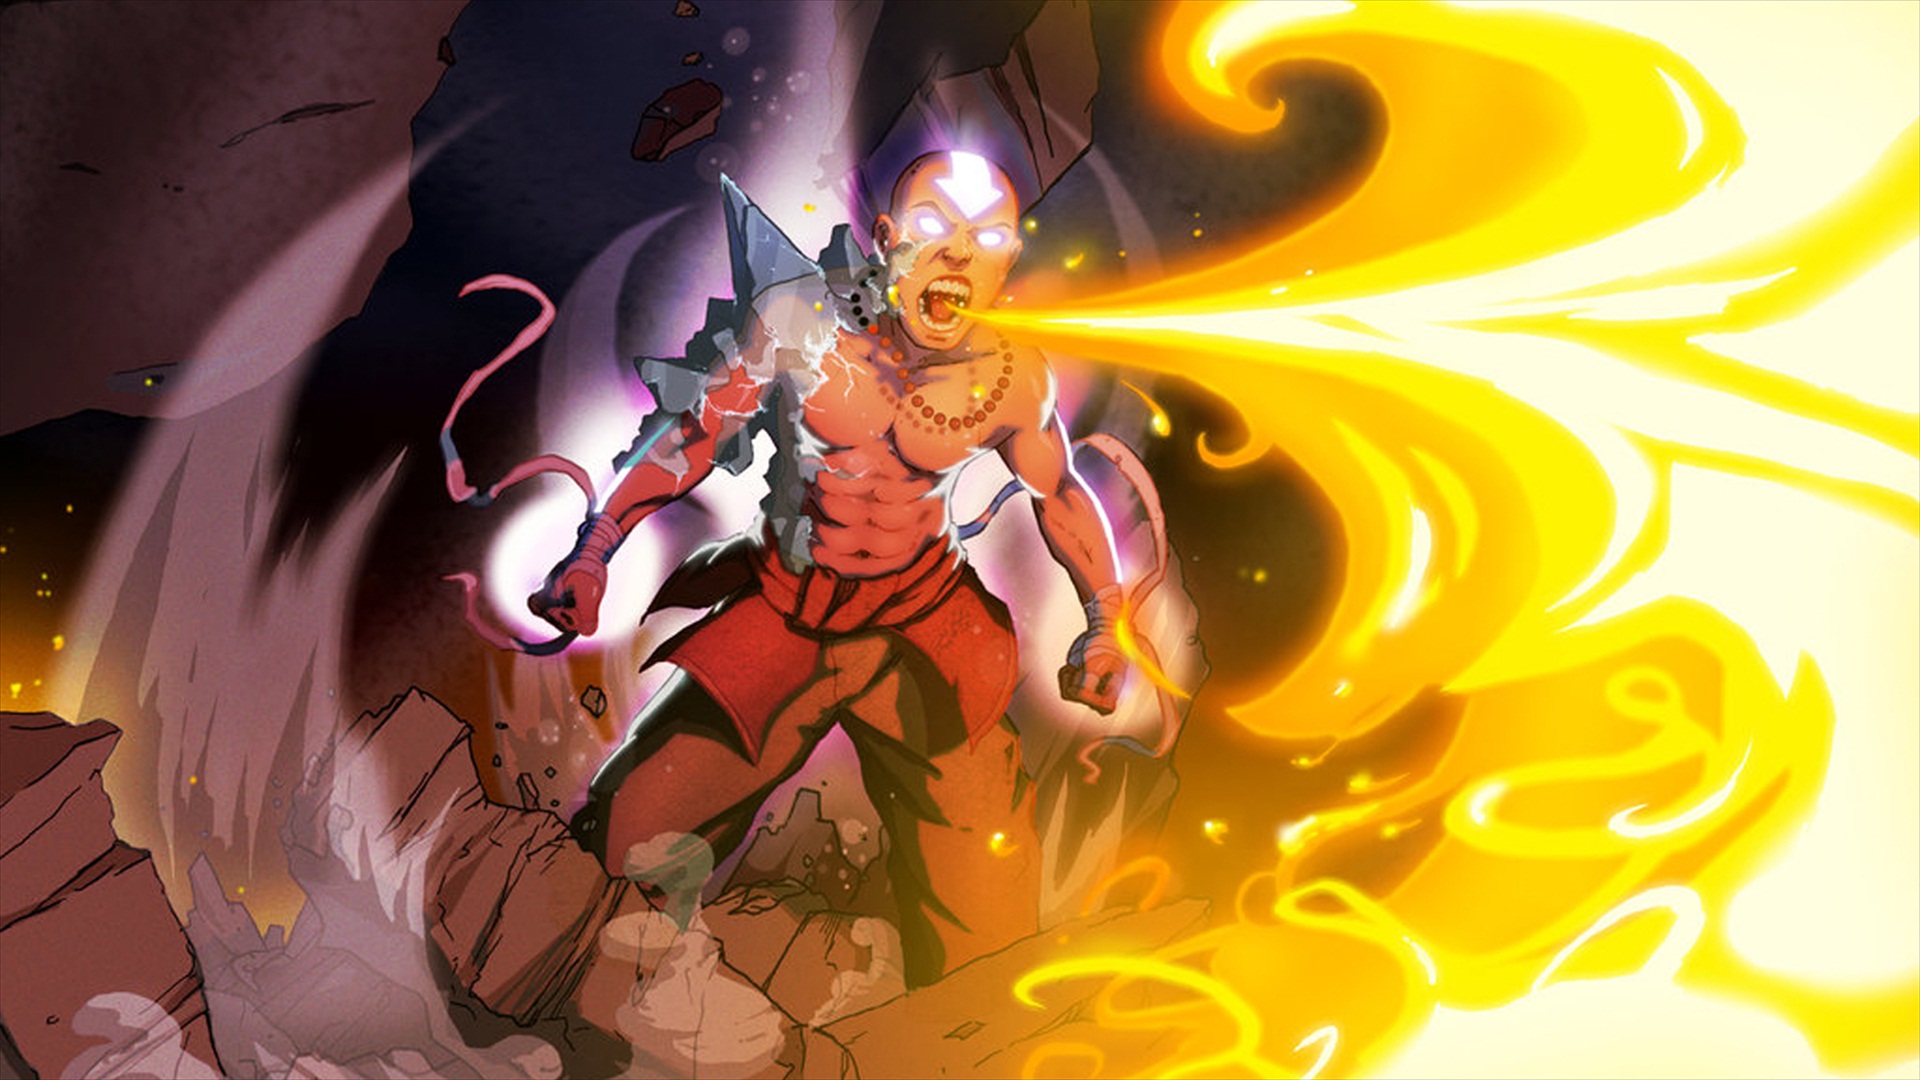 Avatar Aang, from the show Avatar: The Last Airbender, showcases glowing eyes, a fiery background, and his distinctive necklace.